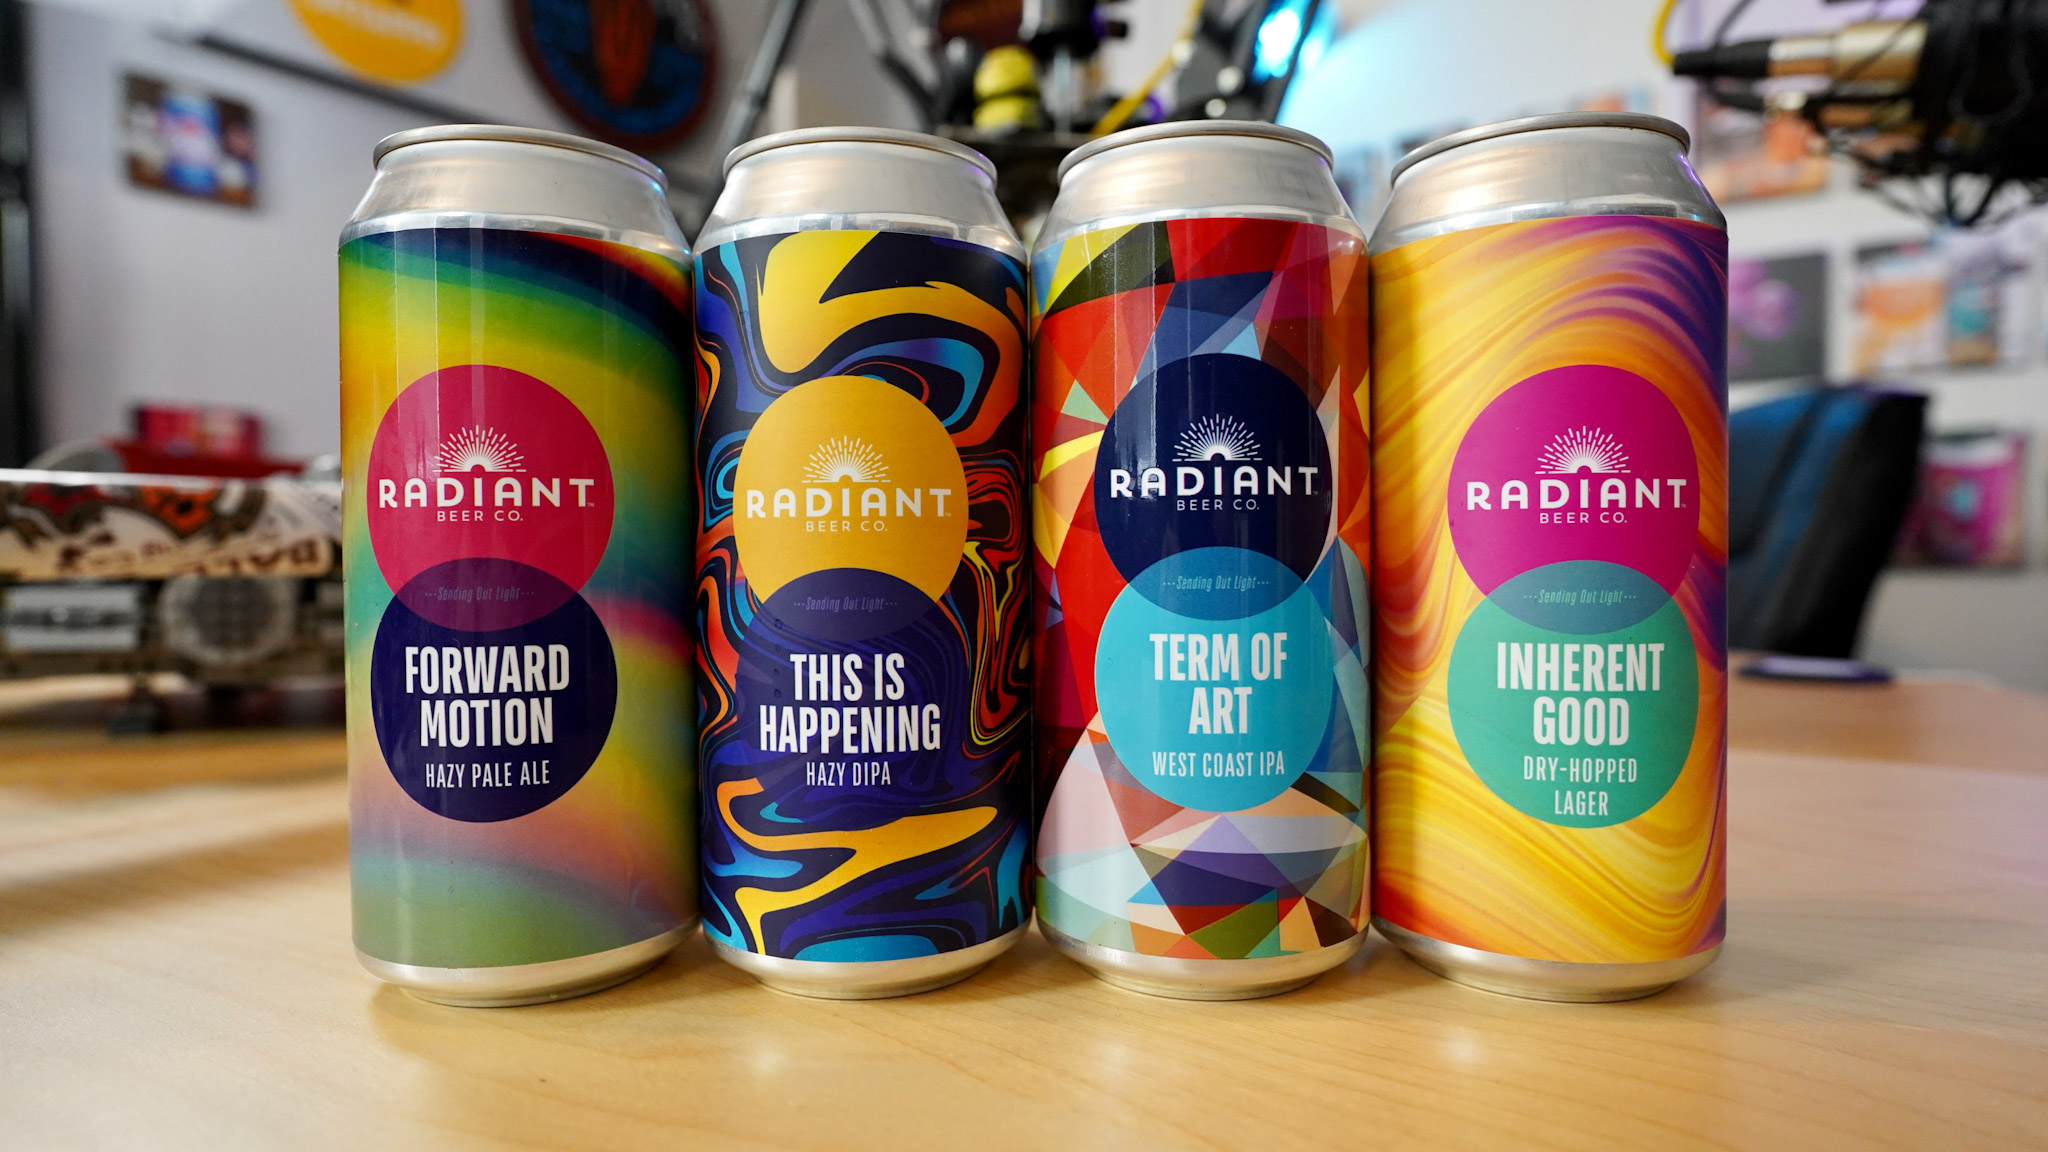 Four cans of colorfully labeled beers from Radiant Beer Co.